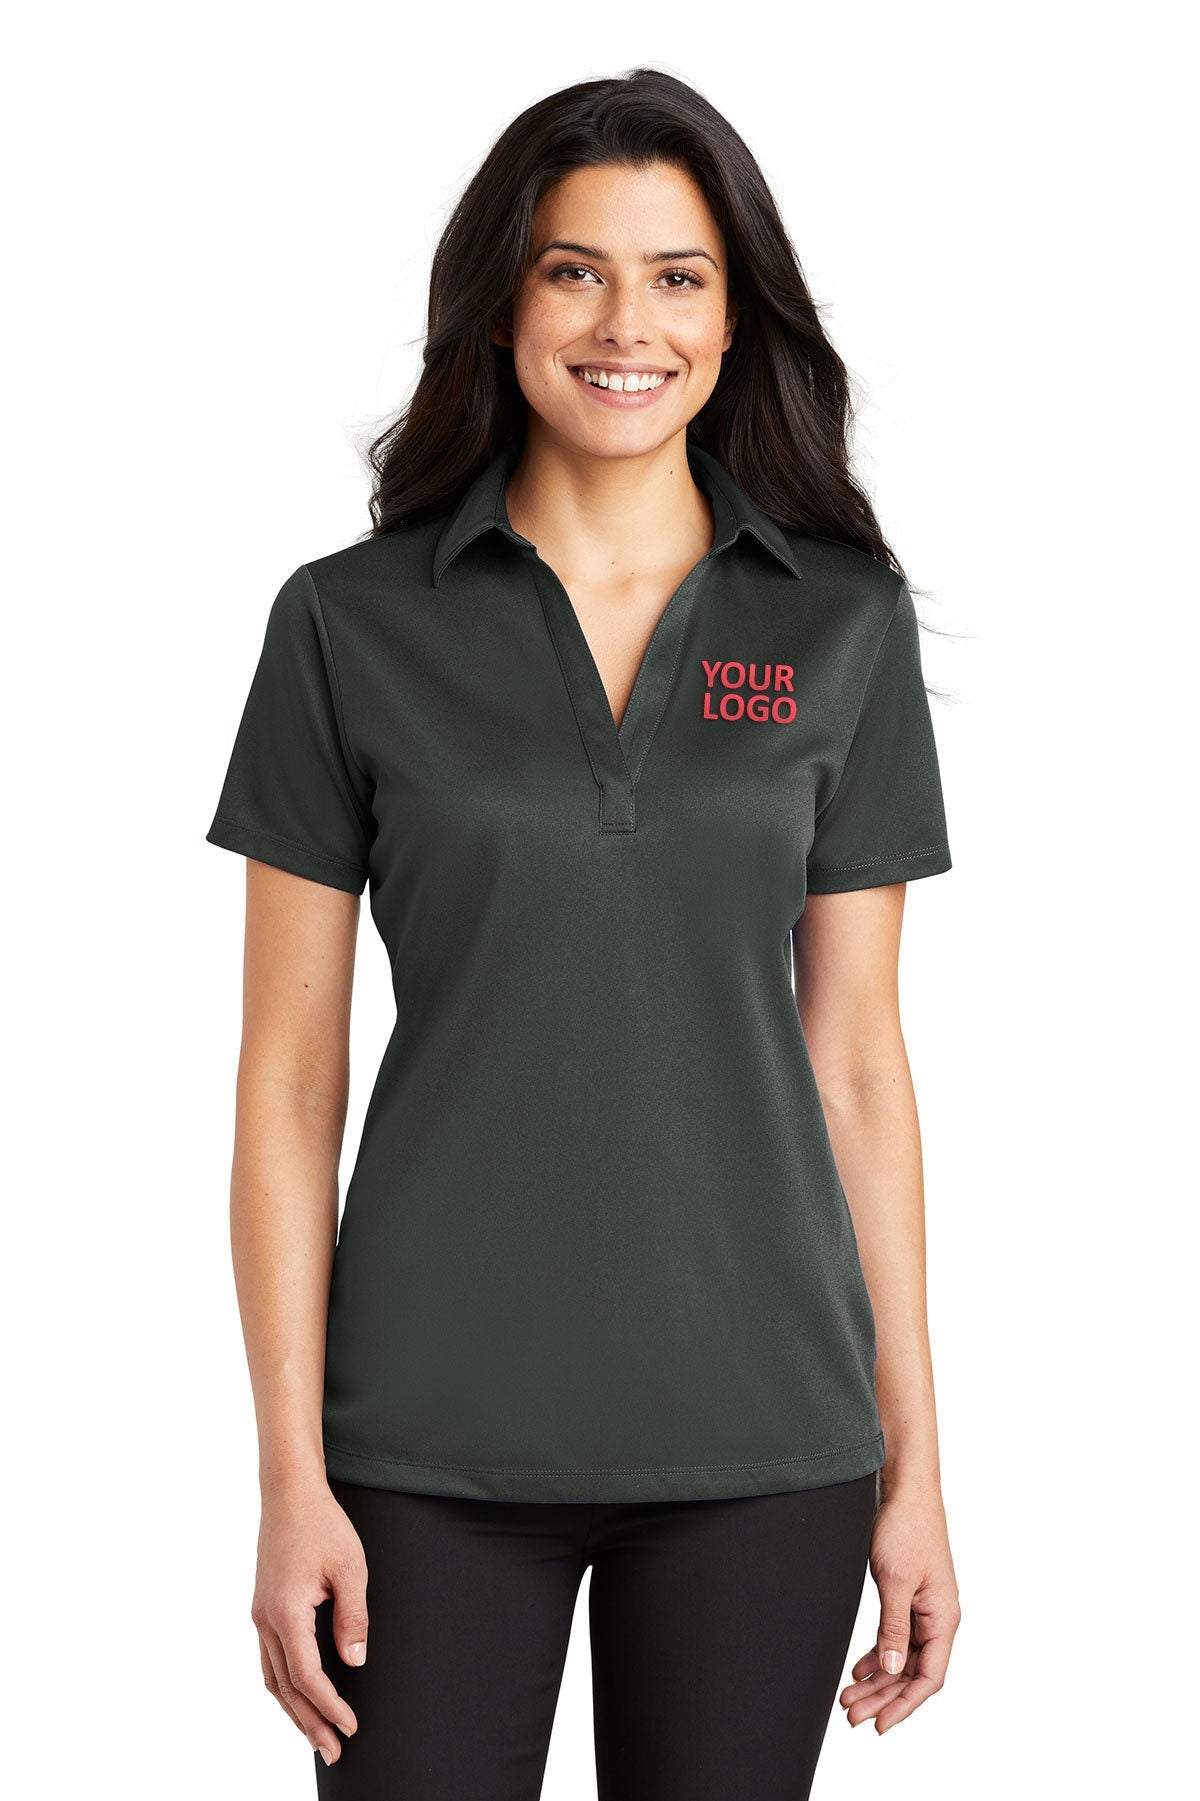 port authority steel grey l540 polo shirts with embroidered custom logo